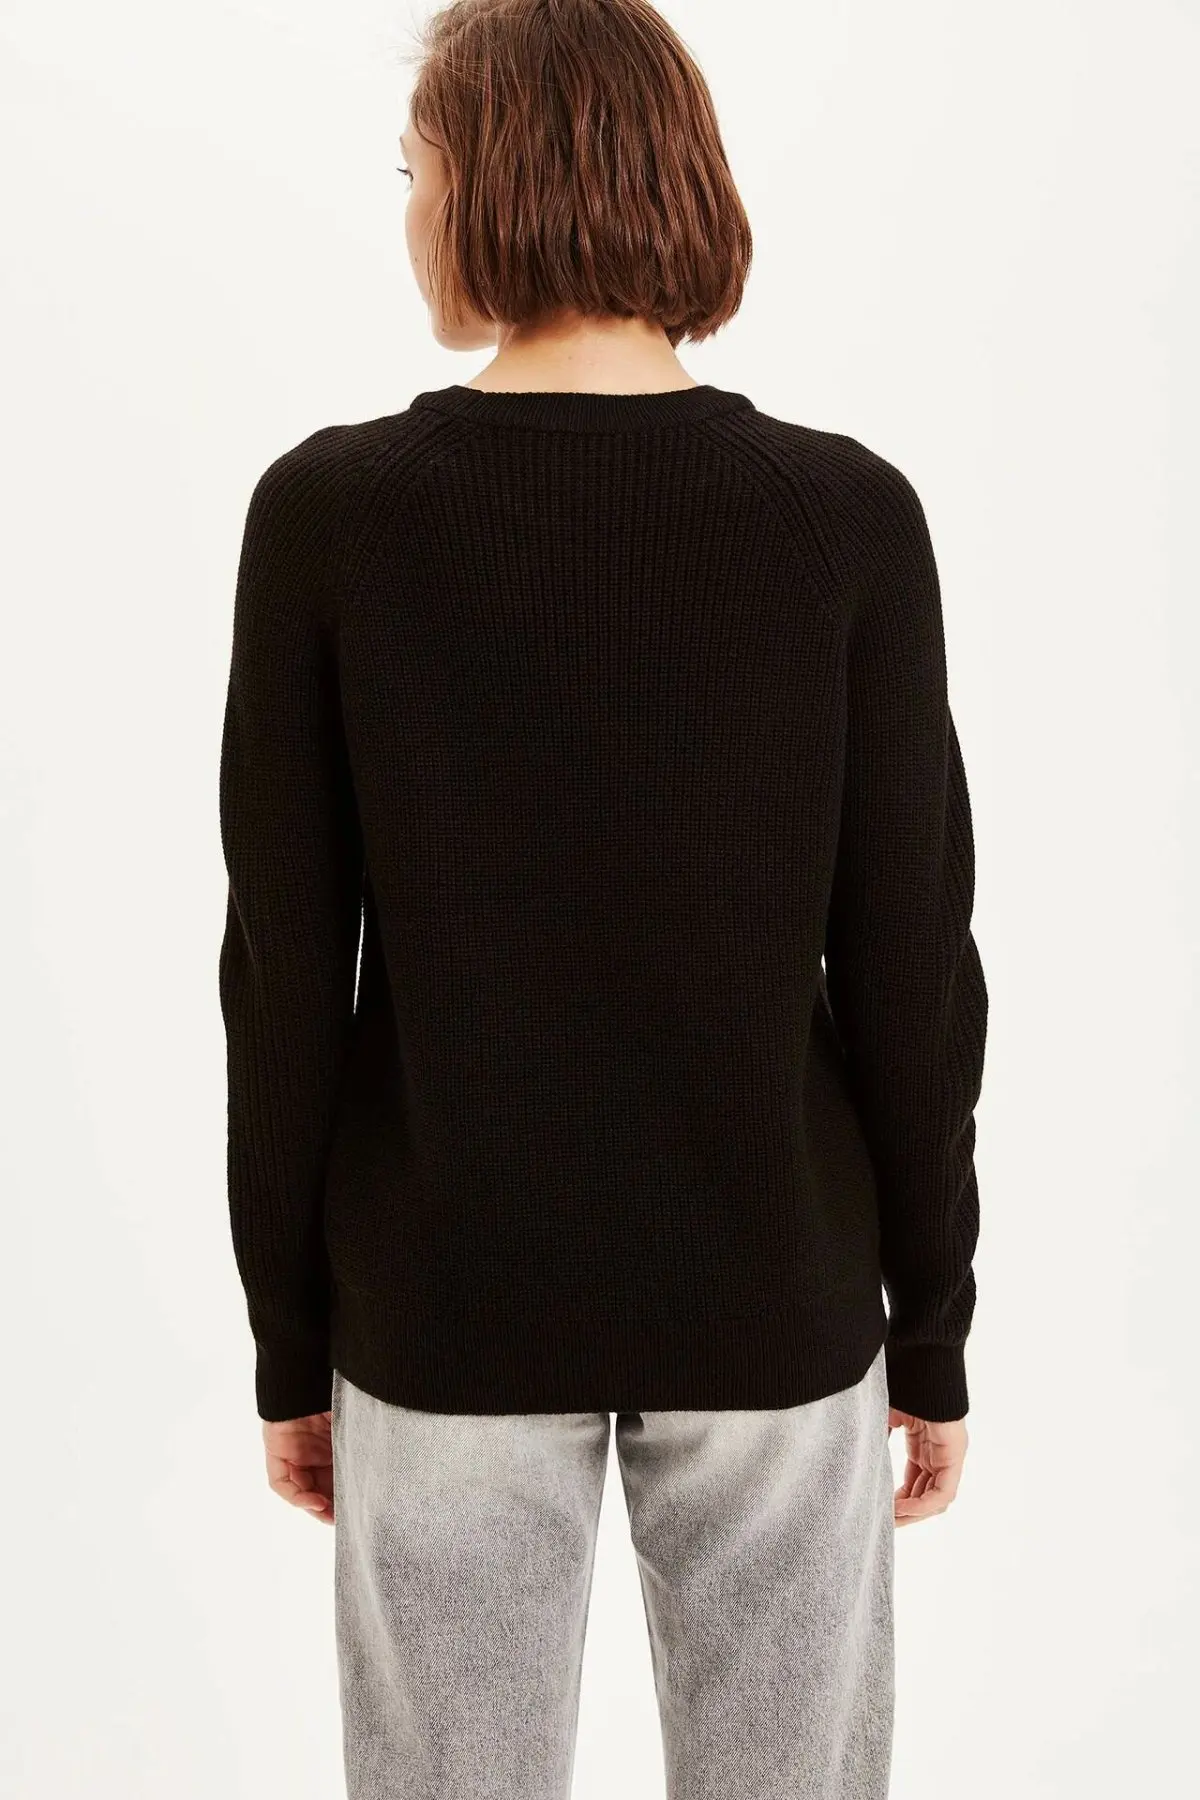 Defacto woman crew pullovers loose